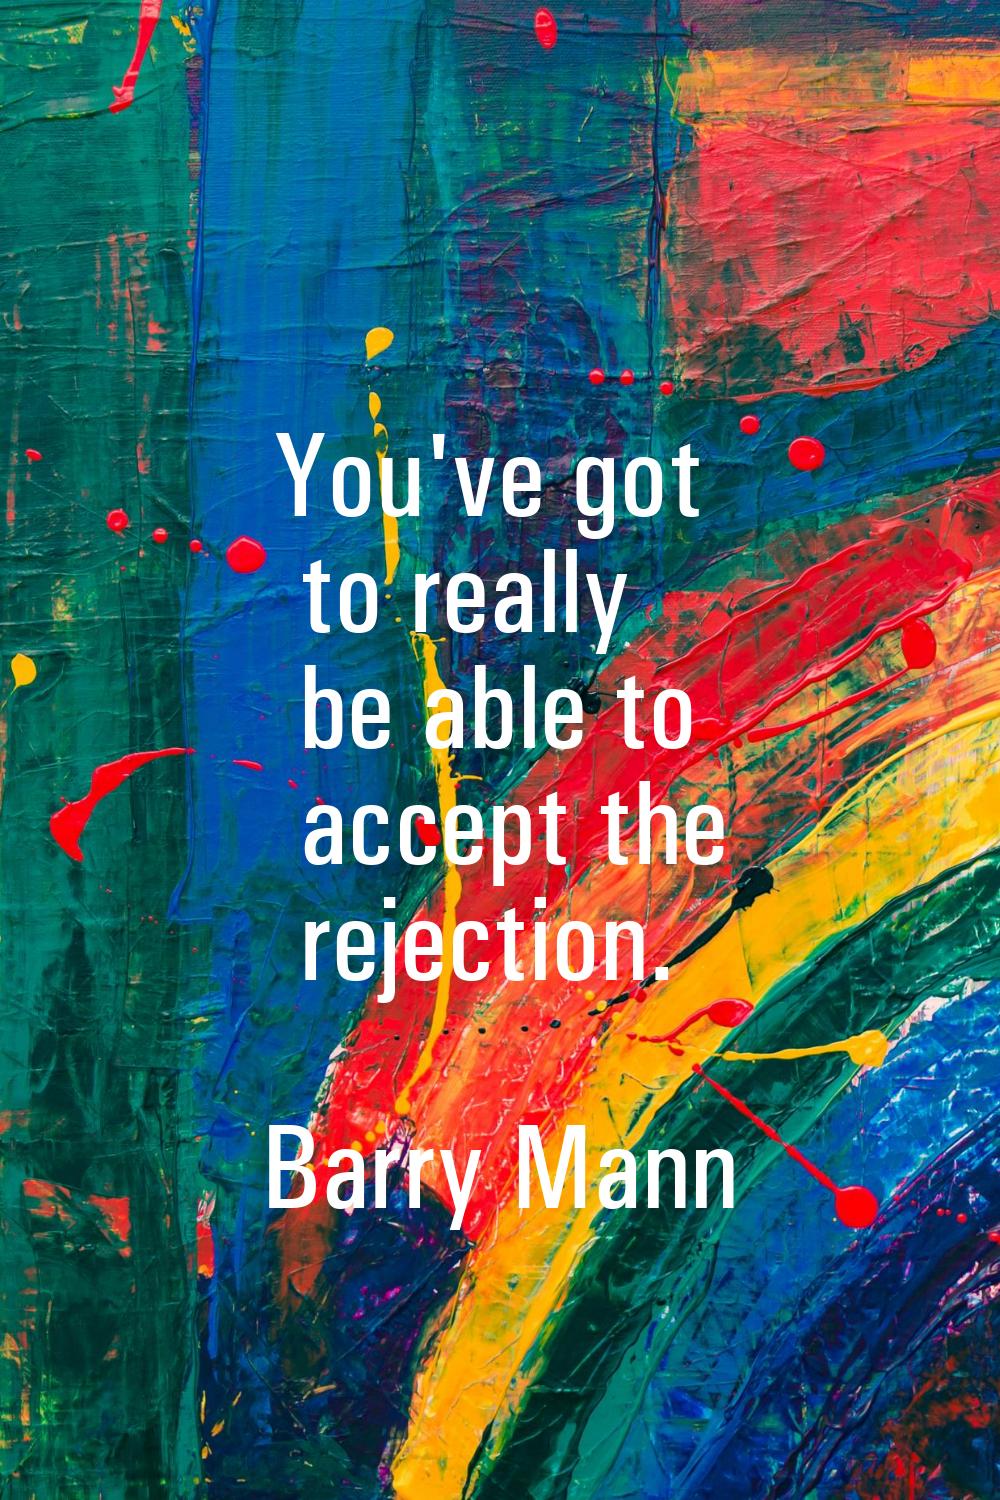 You've got to really be able to accept the rejection.